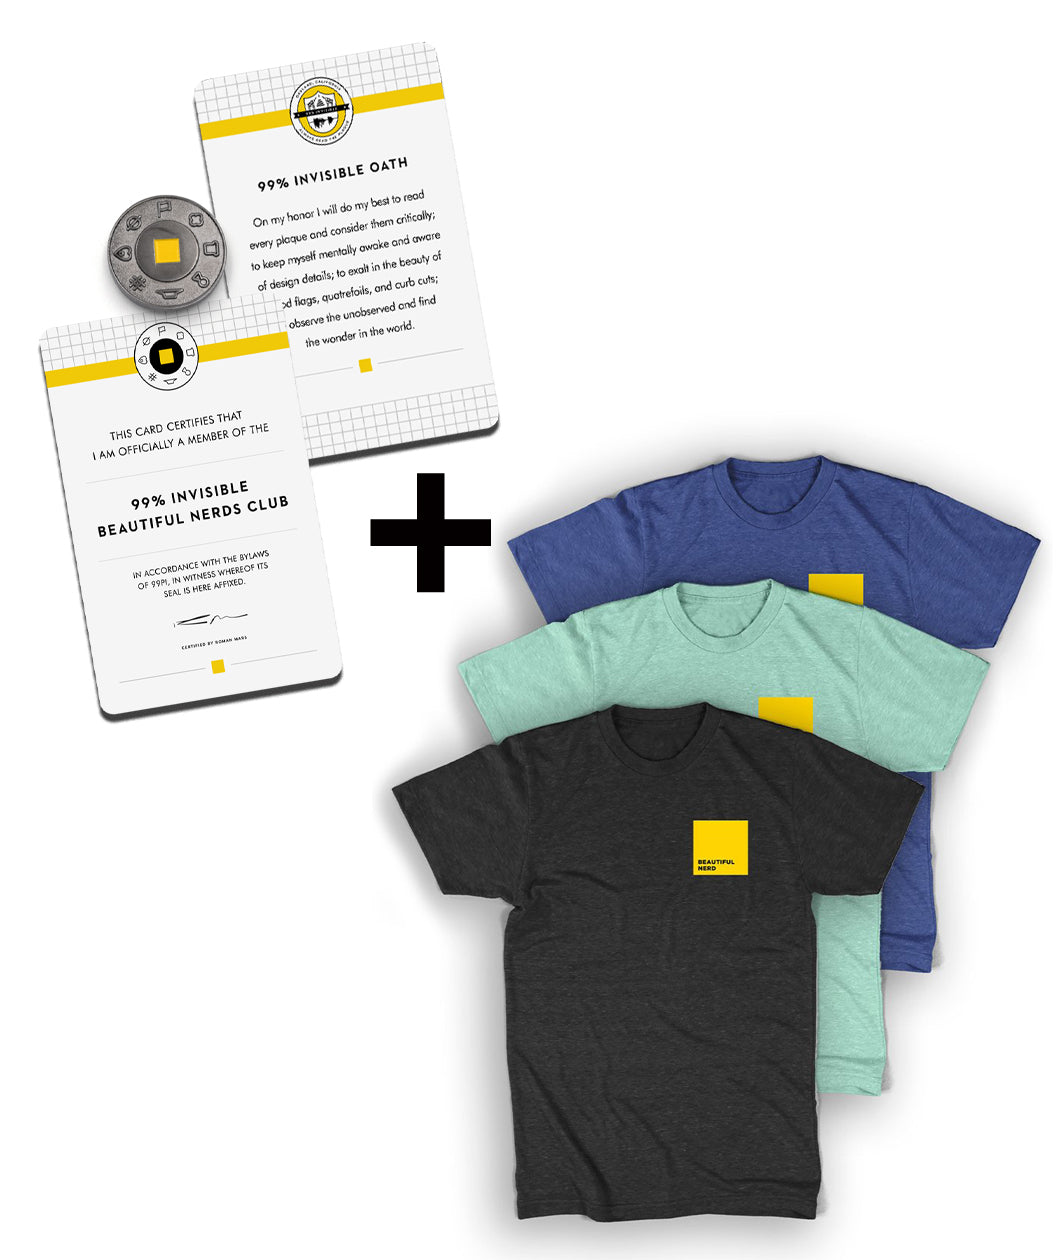 A silver pin, two cards with writing on them, and three t-shirts. The shirts are the same but in different colors- grey, royal blue, and mint. By 99% Invisible